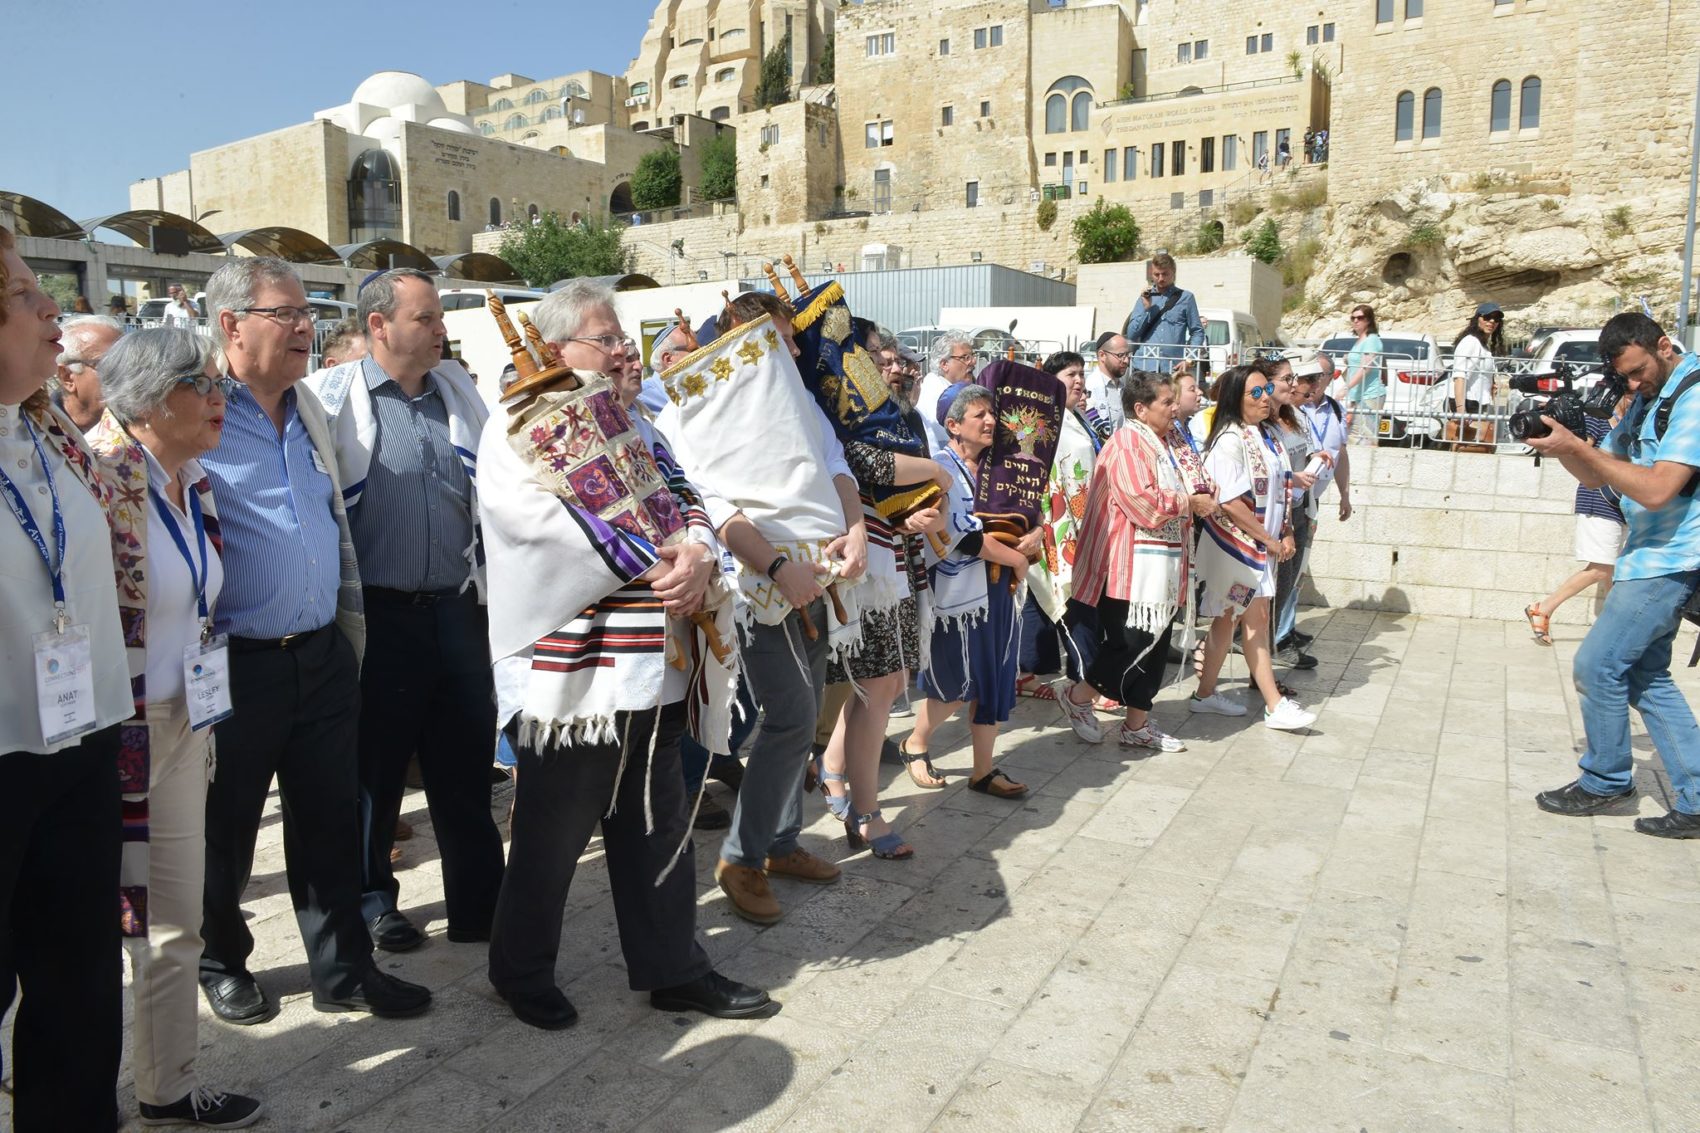 Progressive Jews join together to protest exclusion at the Western Wall plaza of Reform and Conservative Jews